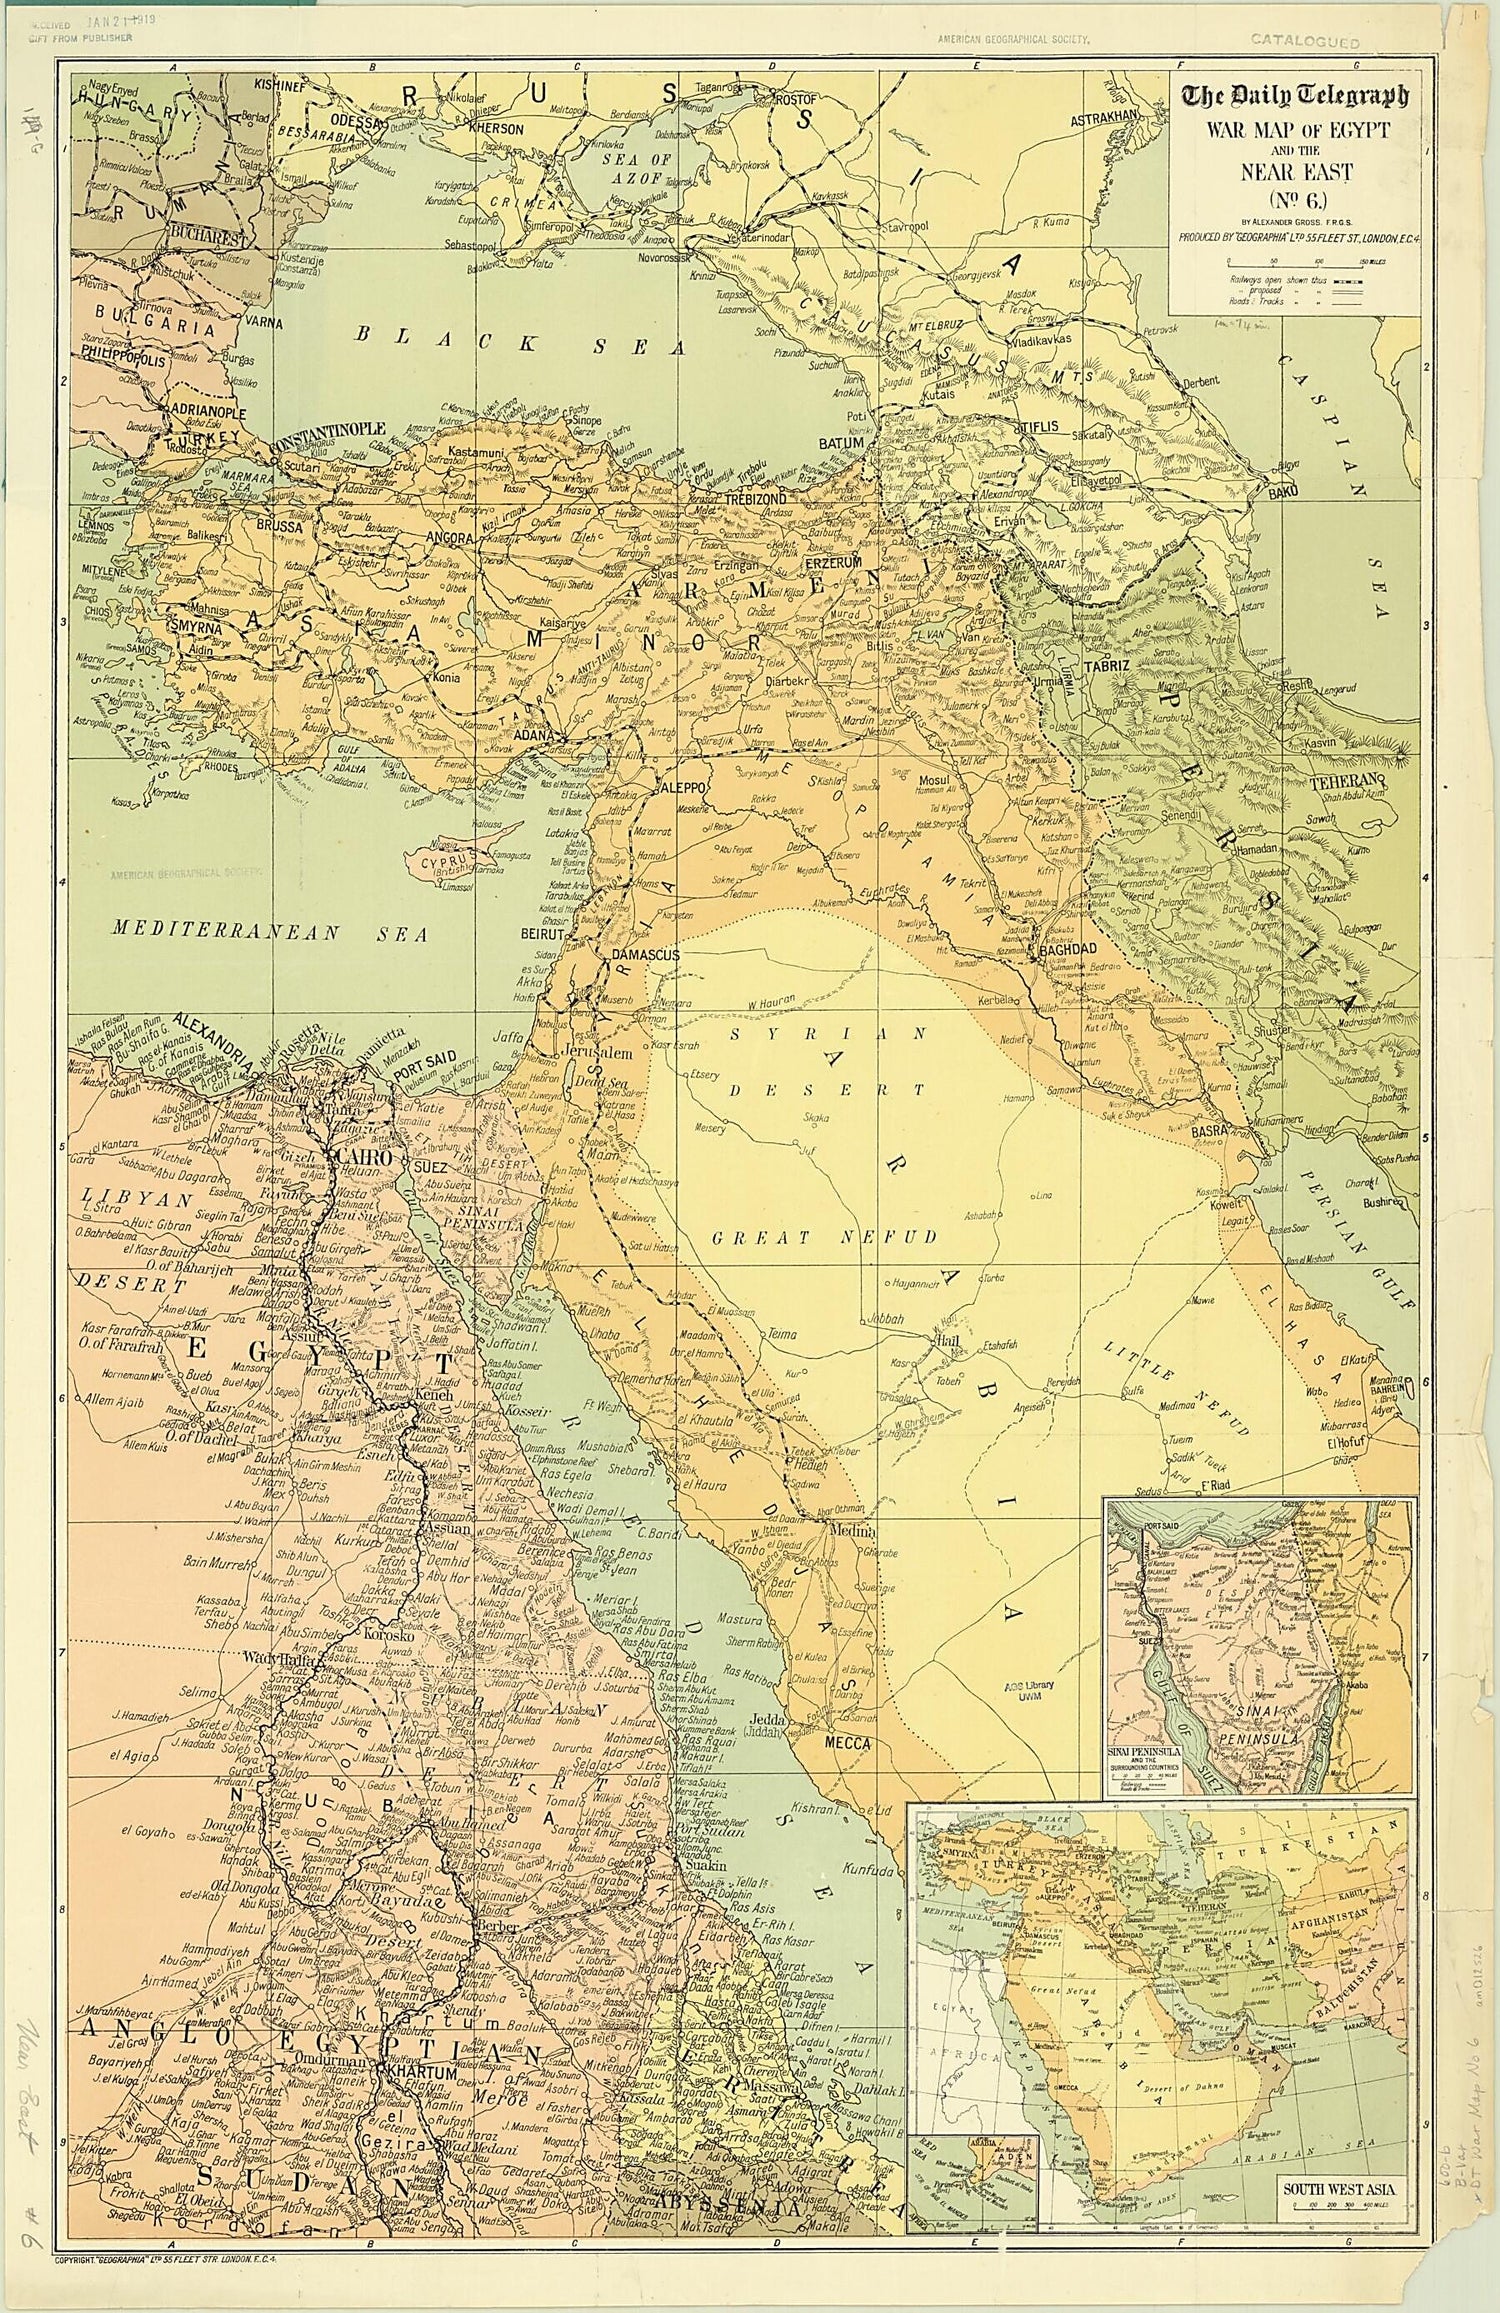 This old map of The Daily Telegraph War Map of Egypt and the Near East (Number 6) from 1918 was created by Alexander Gross,  The Daily Telegraph in 1918